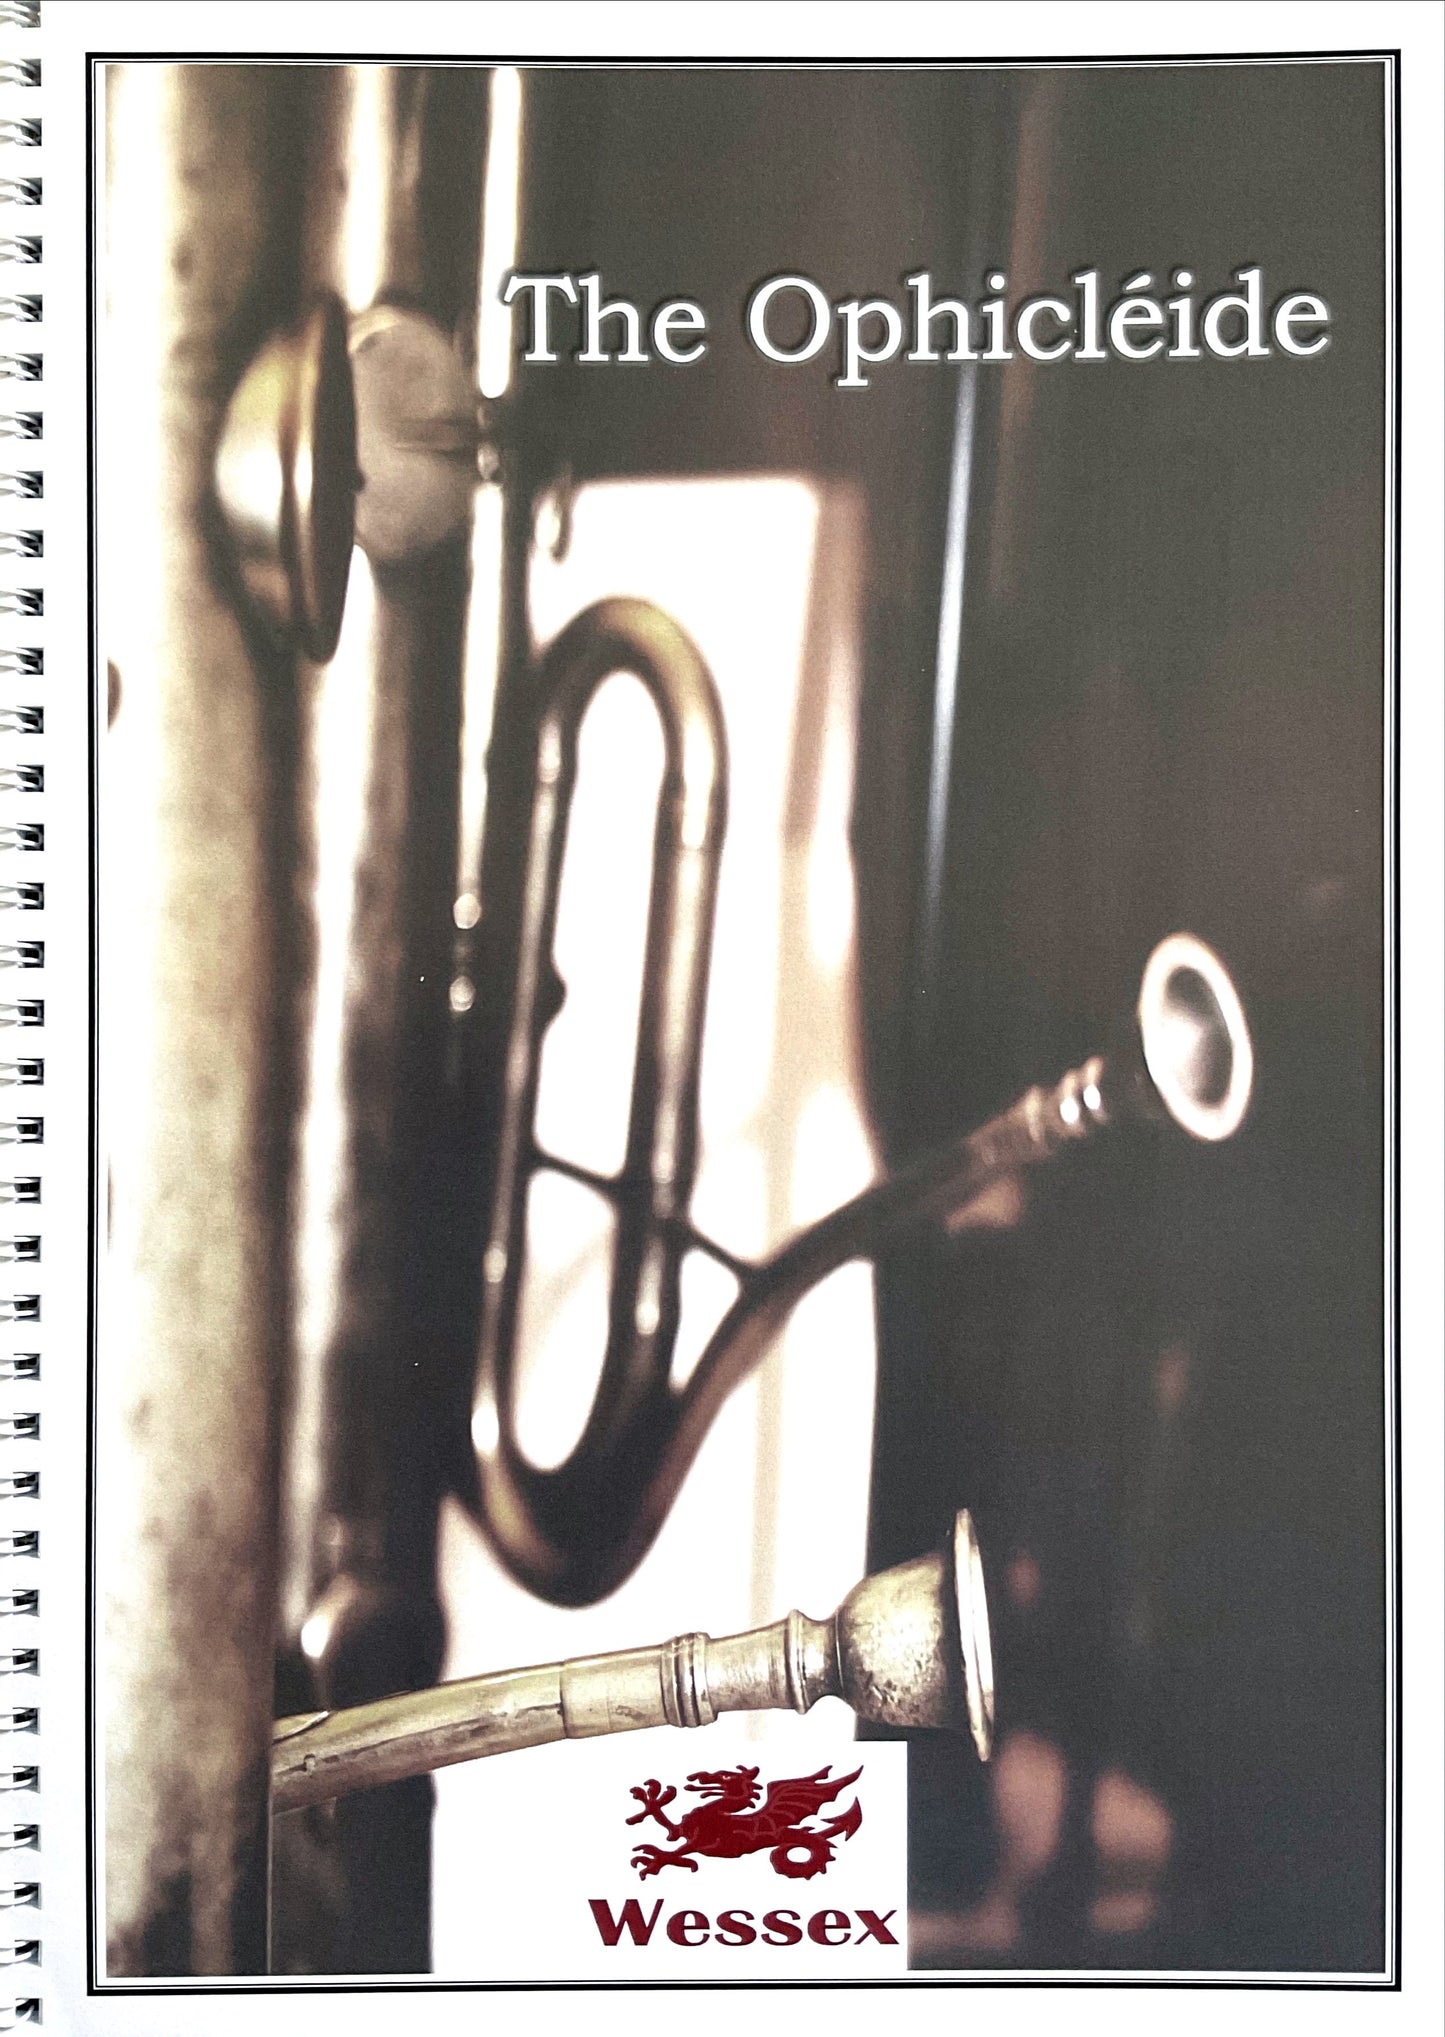 The Ophicleide - book (by Tony George)